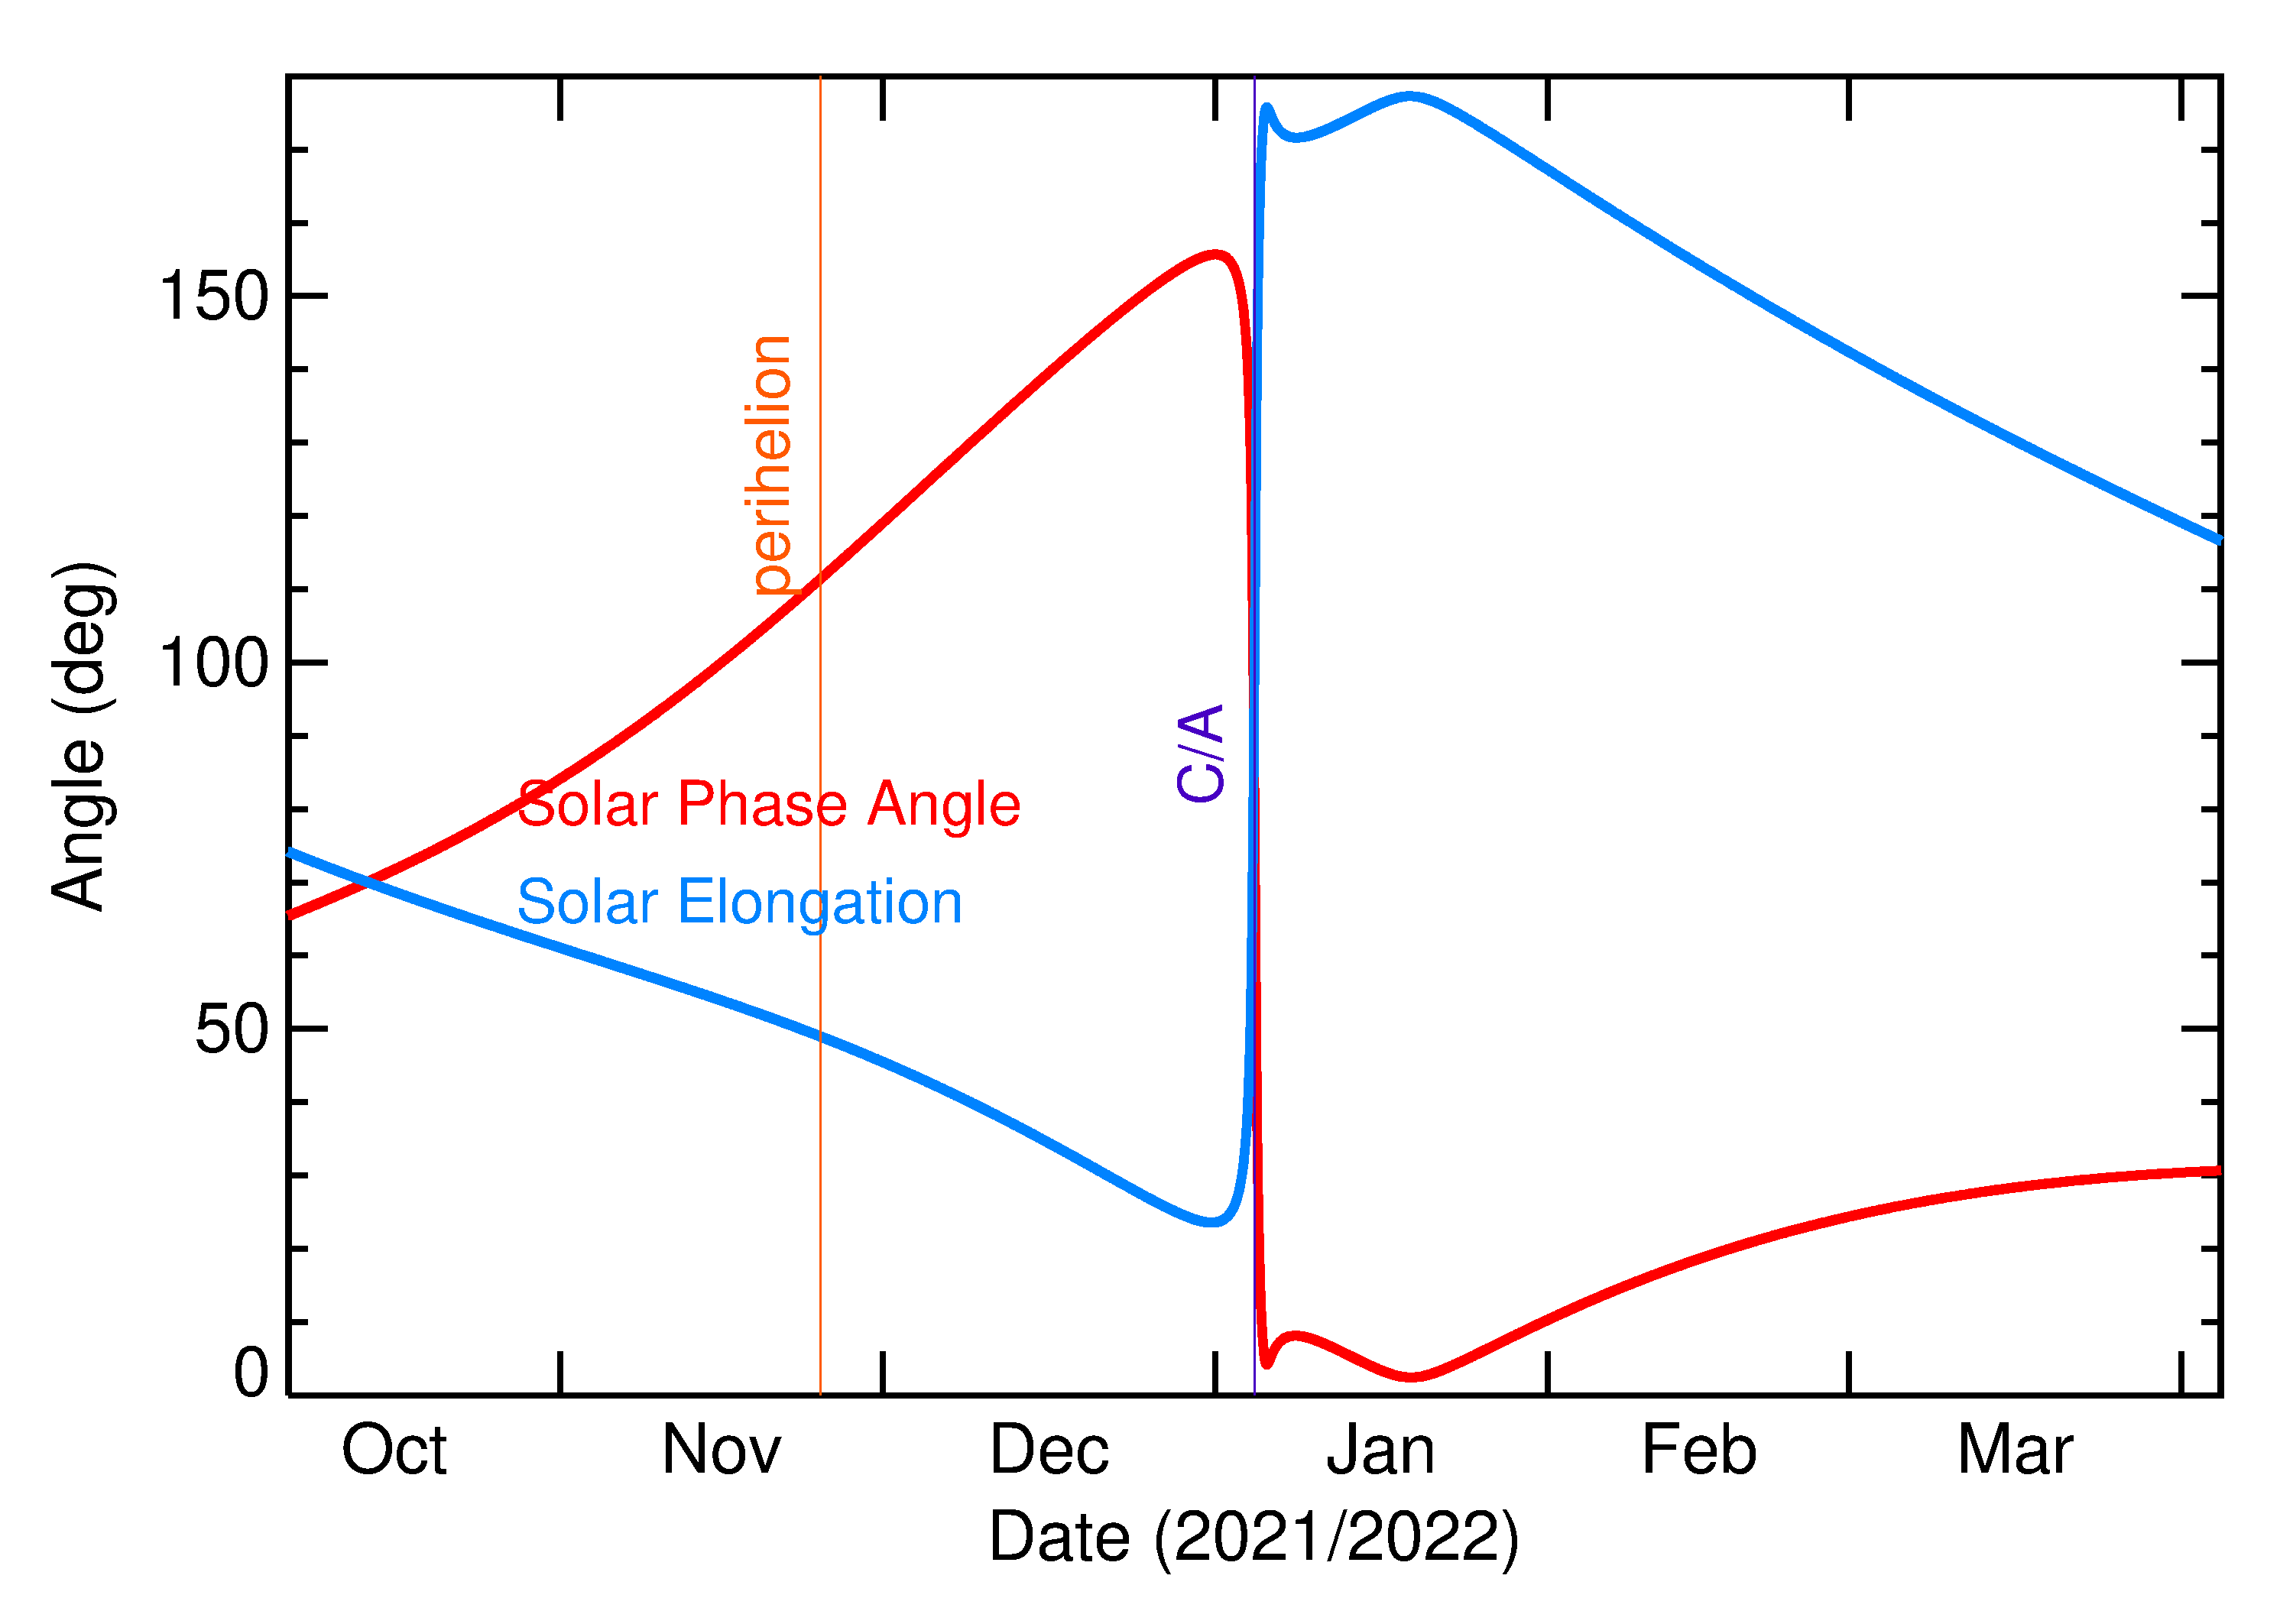 Solar Elongation and Solar Phase Angle of 2022 AO1 in the months around closest approach